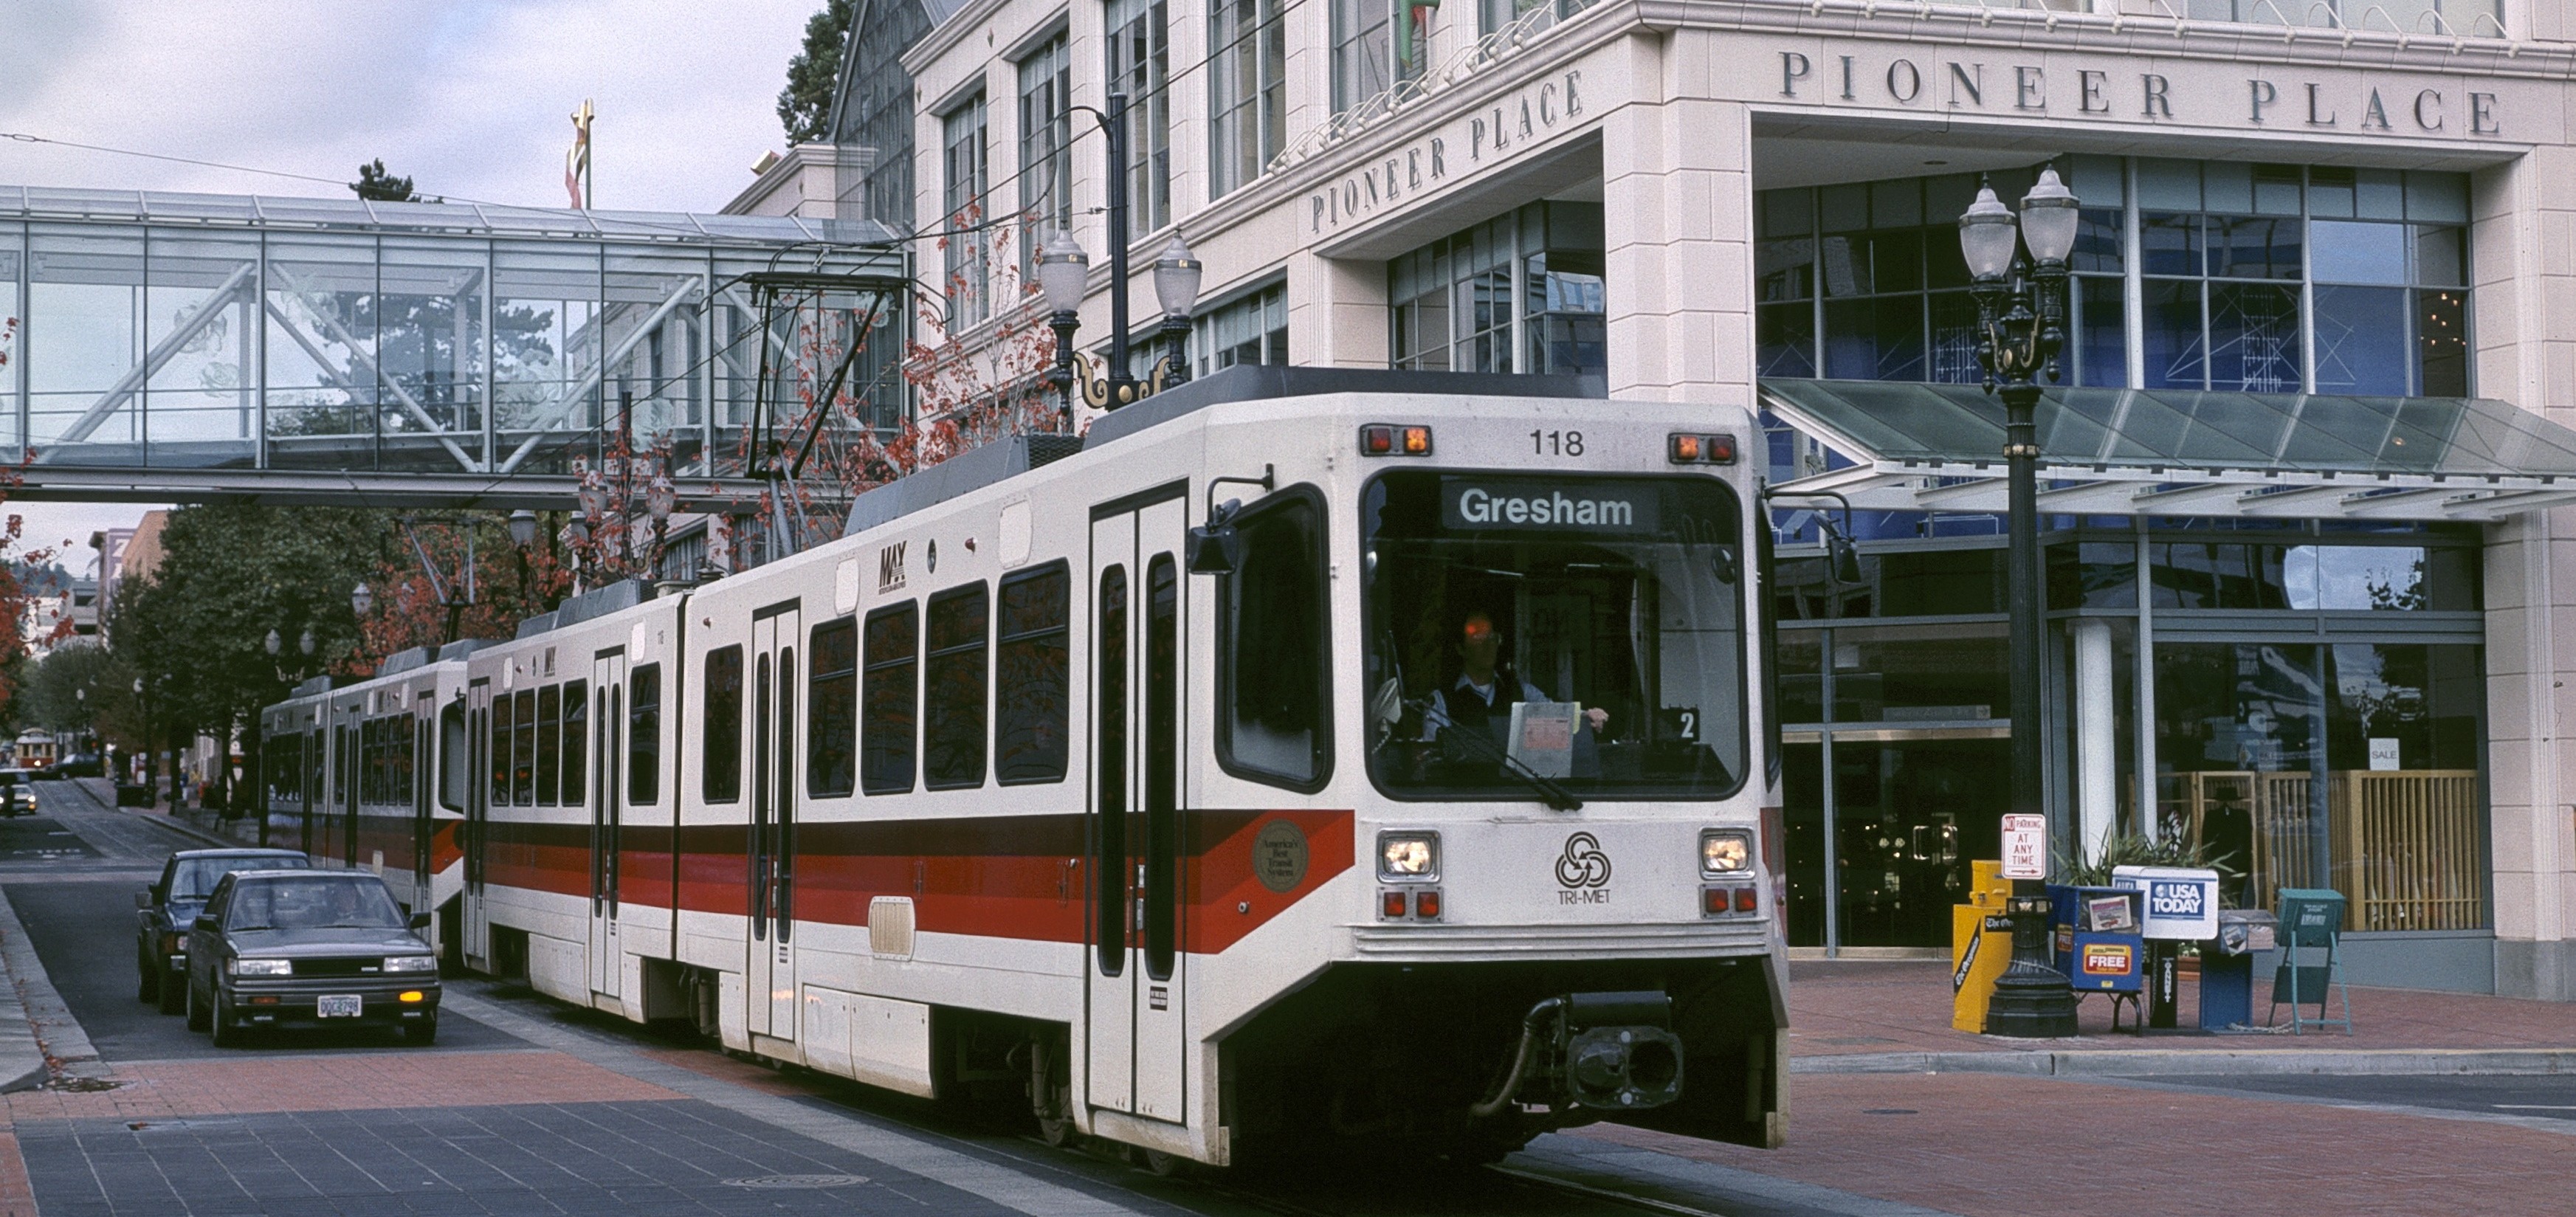 MAX_train_on_Yamhill_St_with_Pioneer_Place_1991_-_Portland_Oregon-e1430466766468